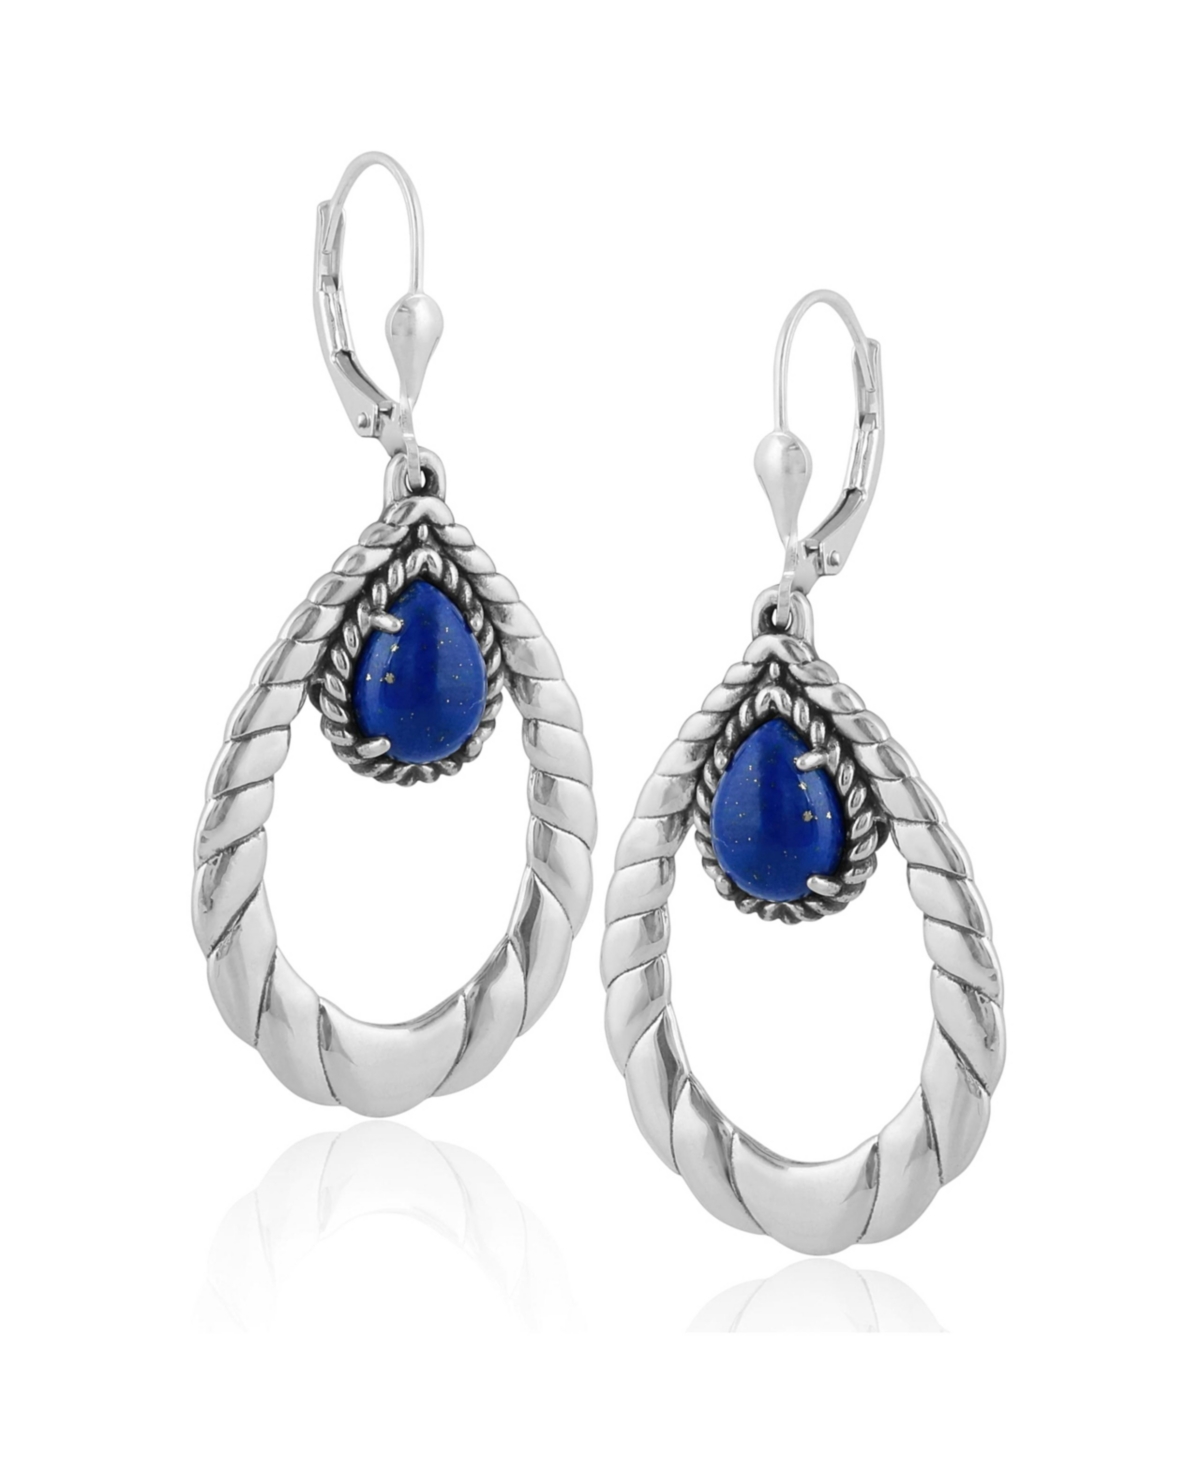 Sterling Silver and Genuine Gemstone Pear Shape Lever Back Earrings - Lapis lazuli